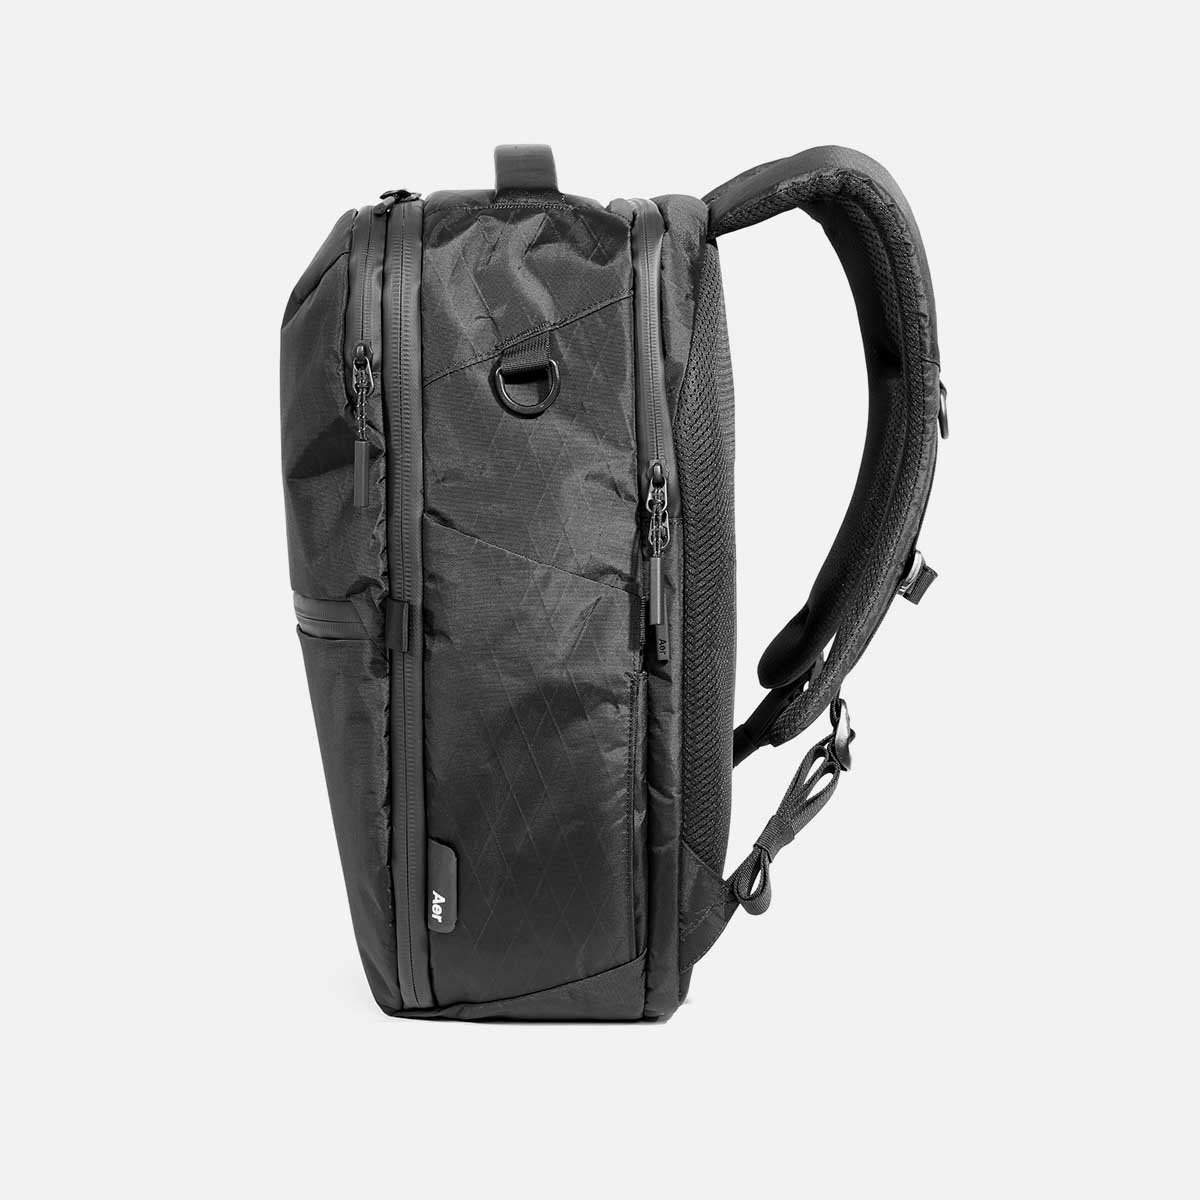 Aer City Pack Pro (X-Pac) the best work backpacks – Mined